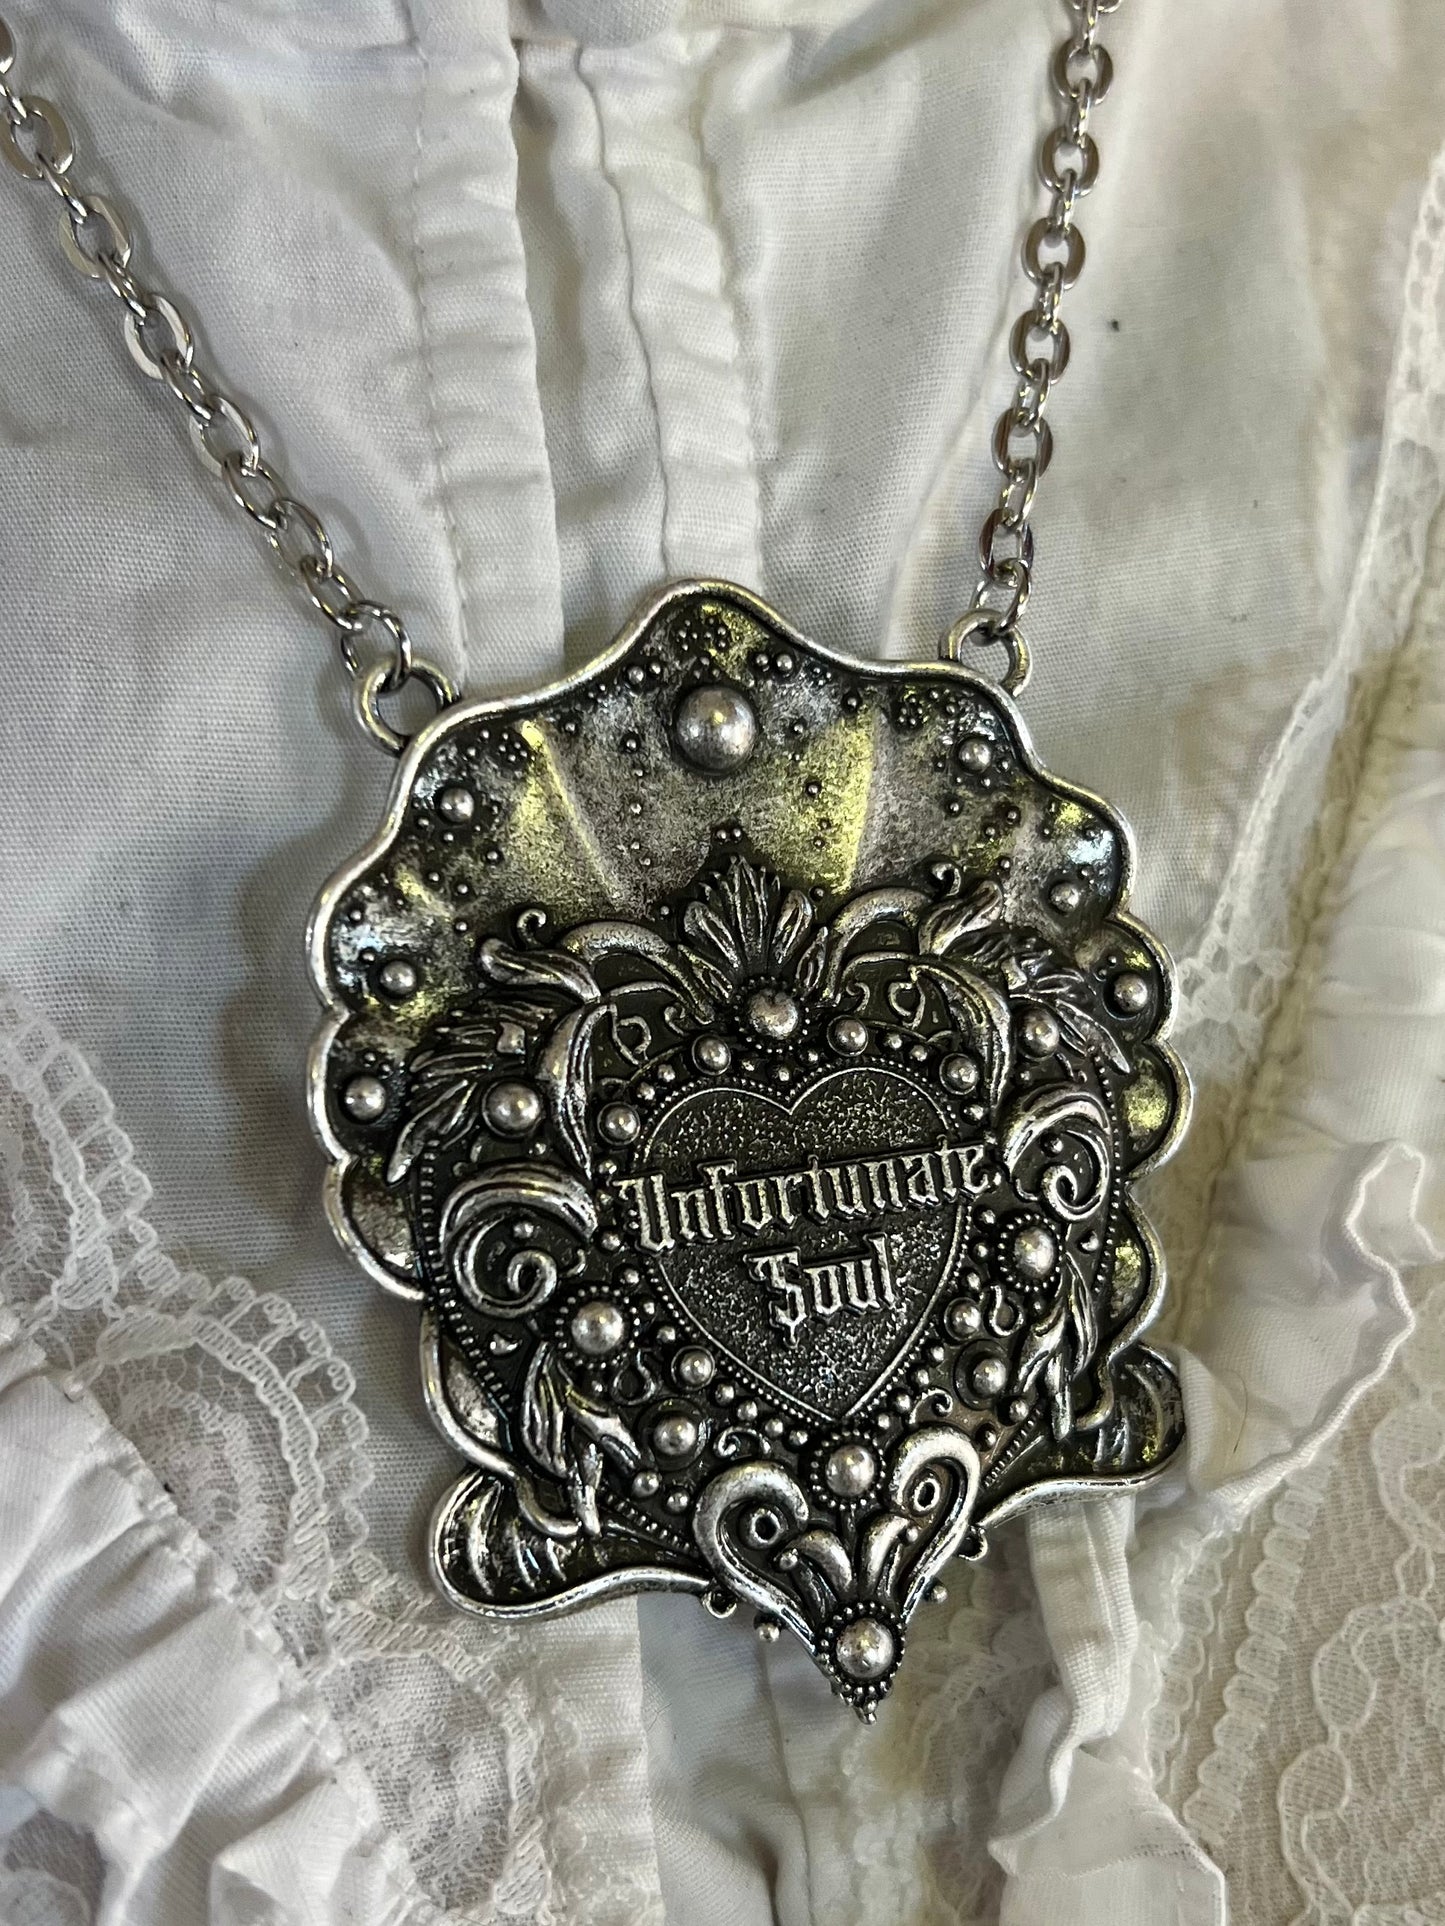 UNFORTUNATE SOUL  - Mother of Hades Cast Necklace